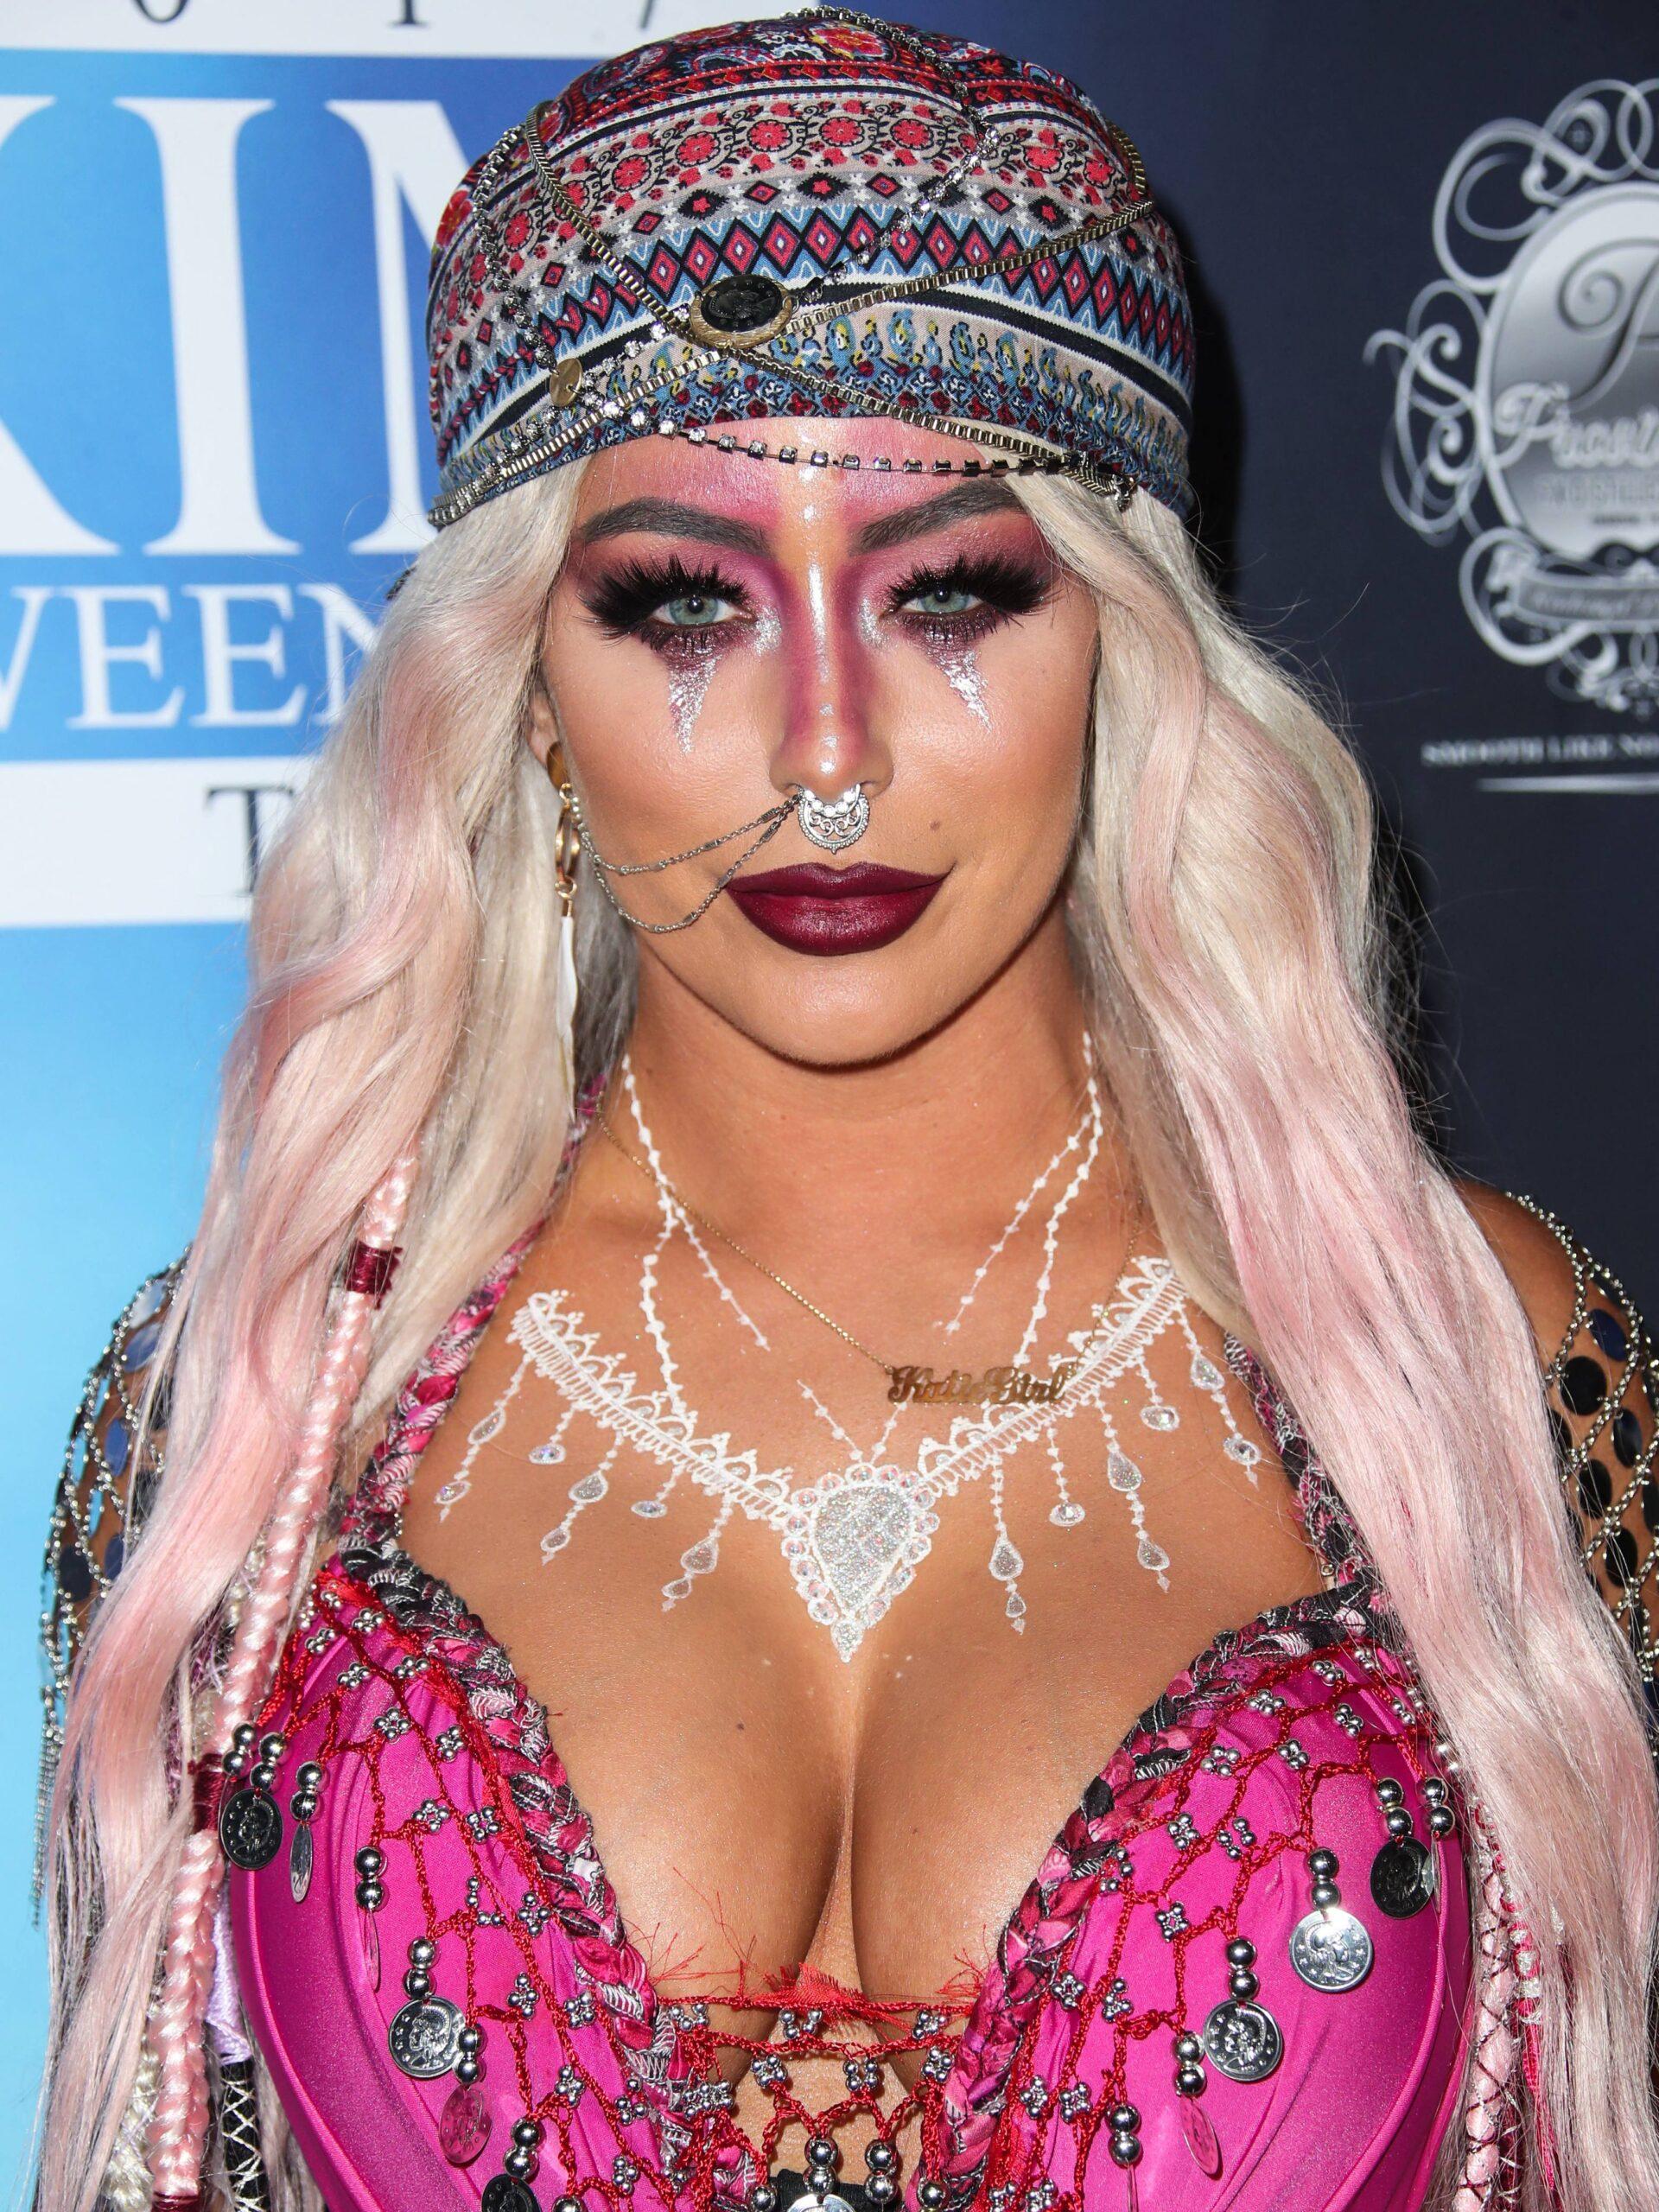 Aubrey O'Day attends the 2017 MAXIM Halloween Party